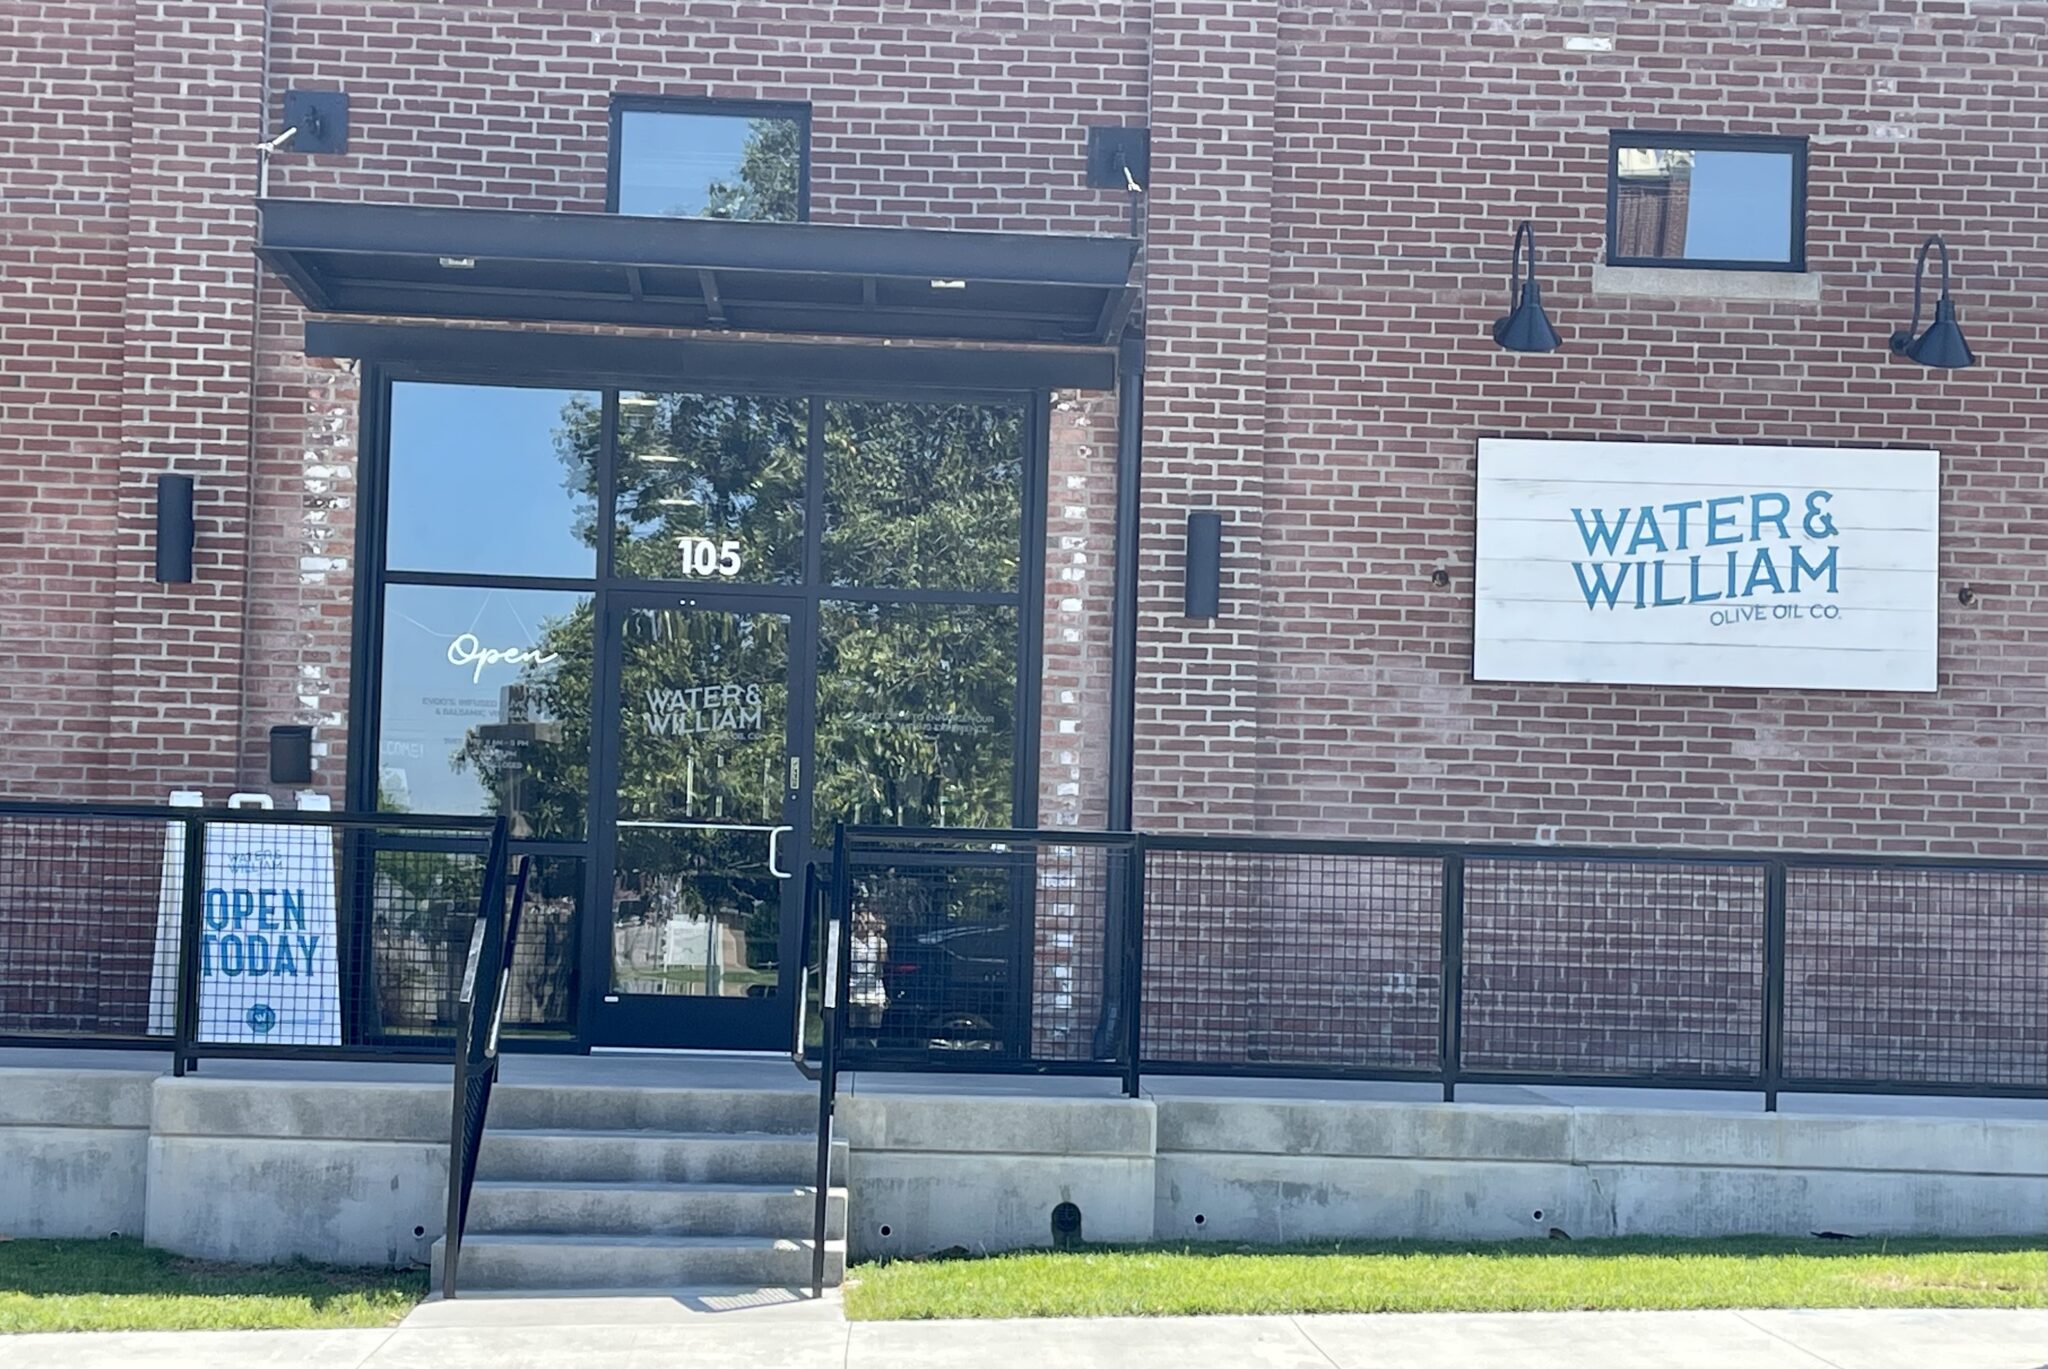 Water & William Olive Oil Co.